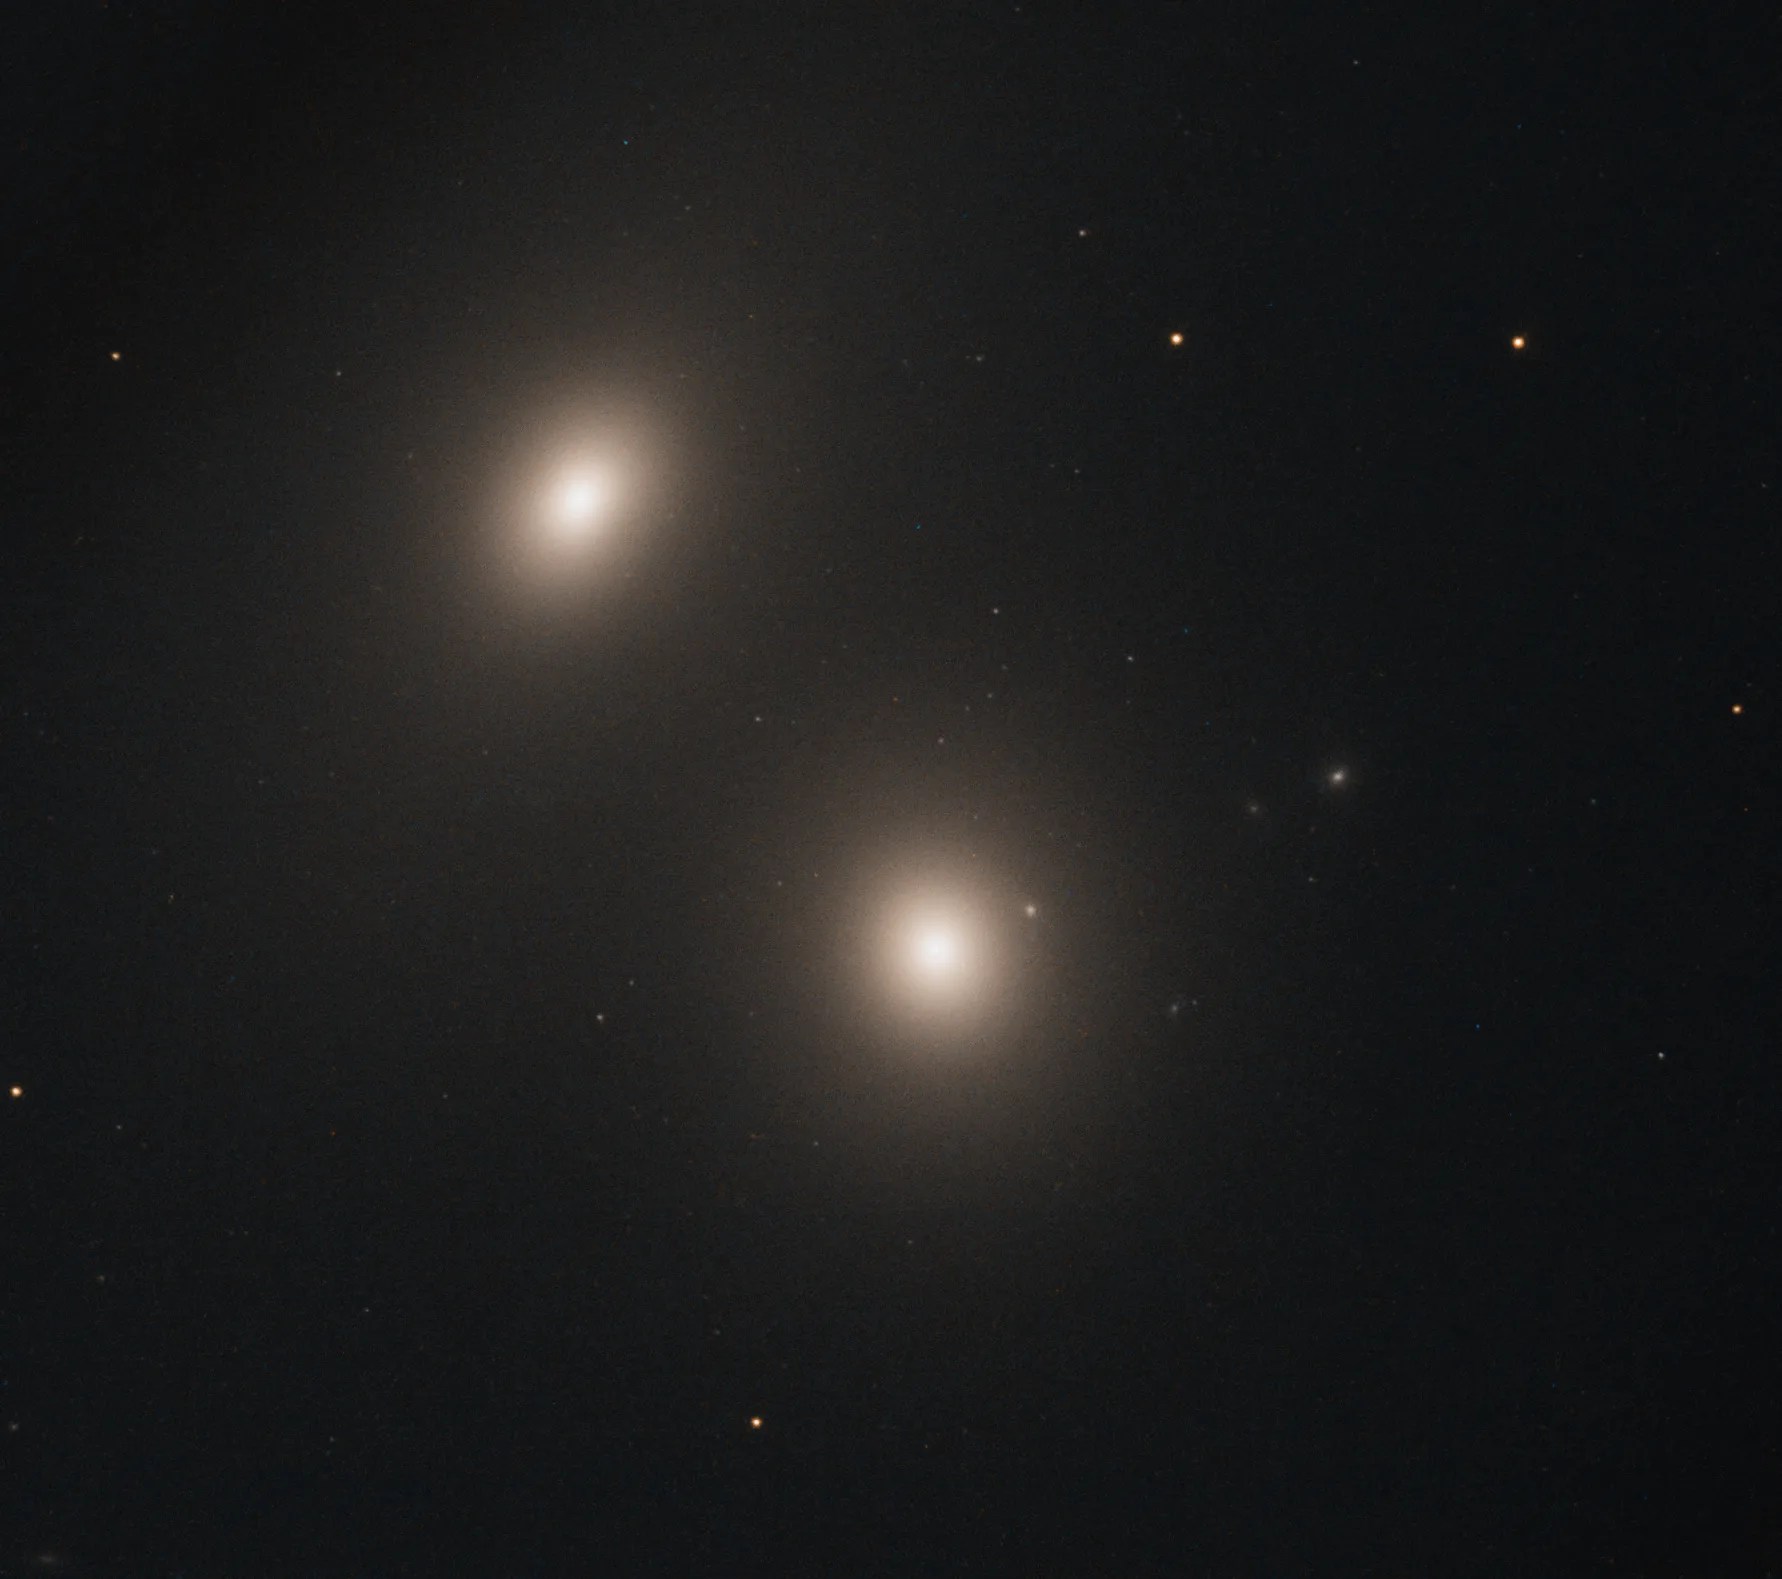 Two bright, oval blobs of stars. One right below image center, the other to the upper left. These blobs are galaxies with bright white centers that dims toward their edges. Black background dotted with stars.